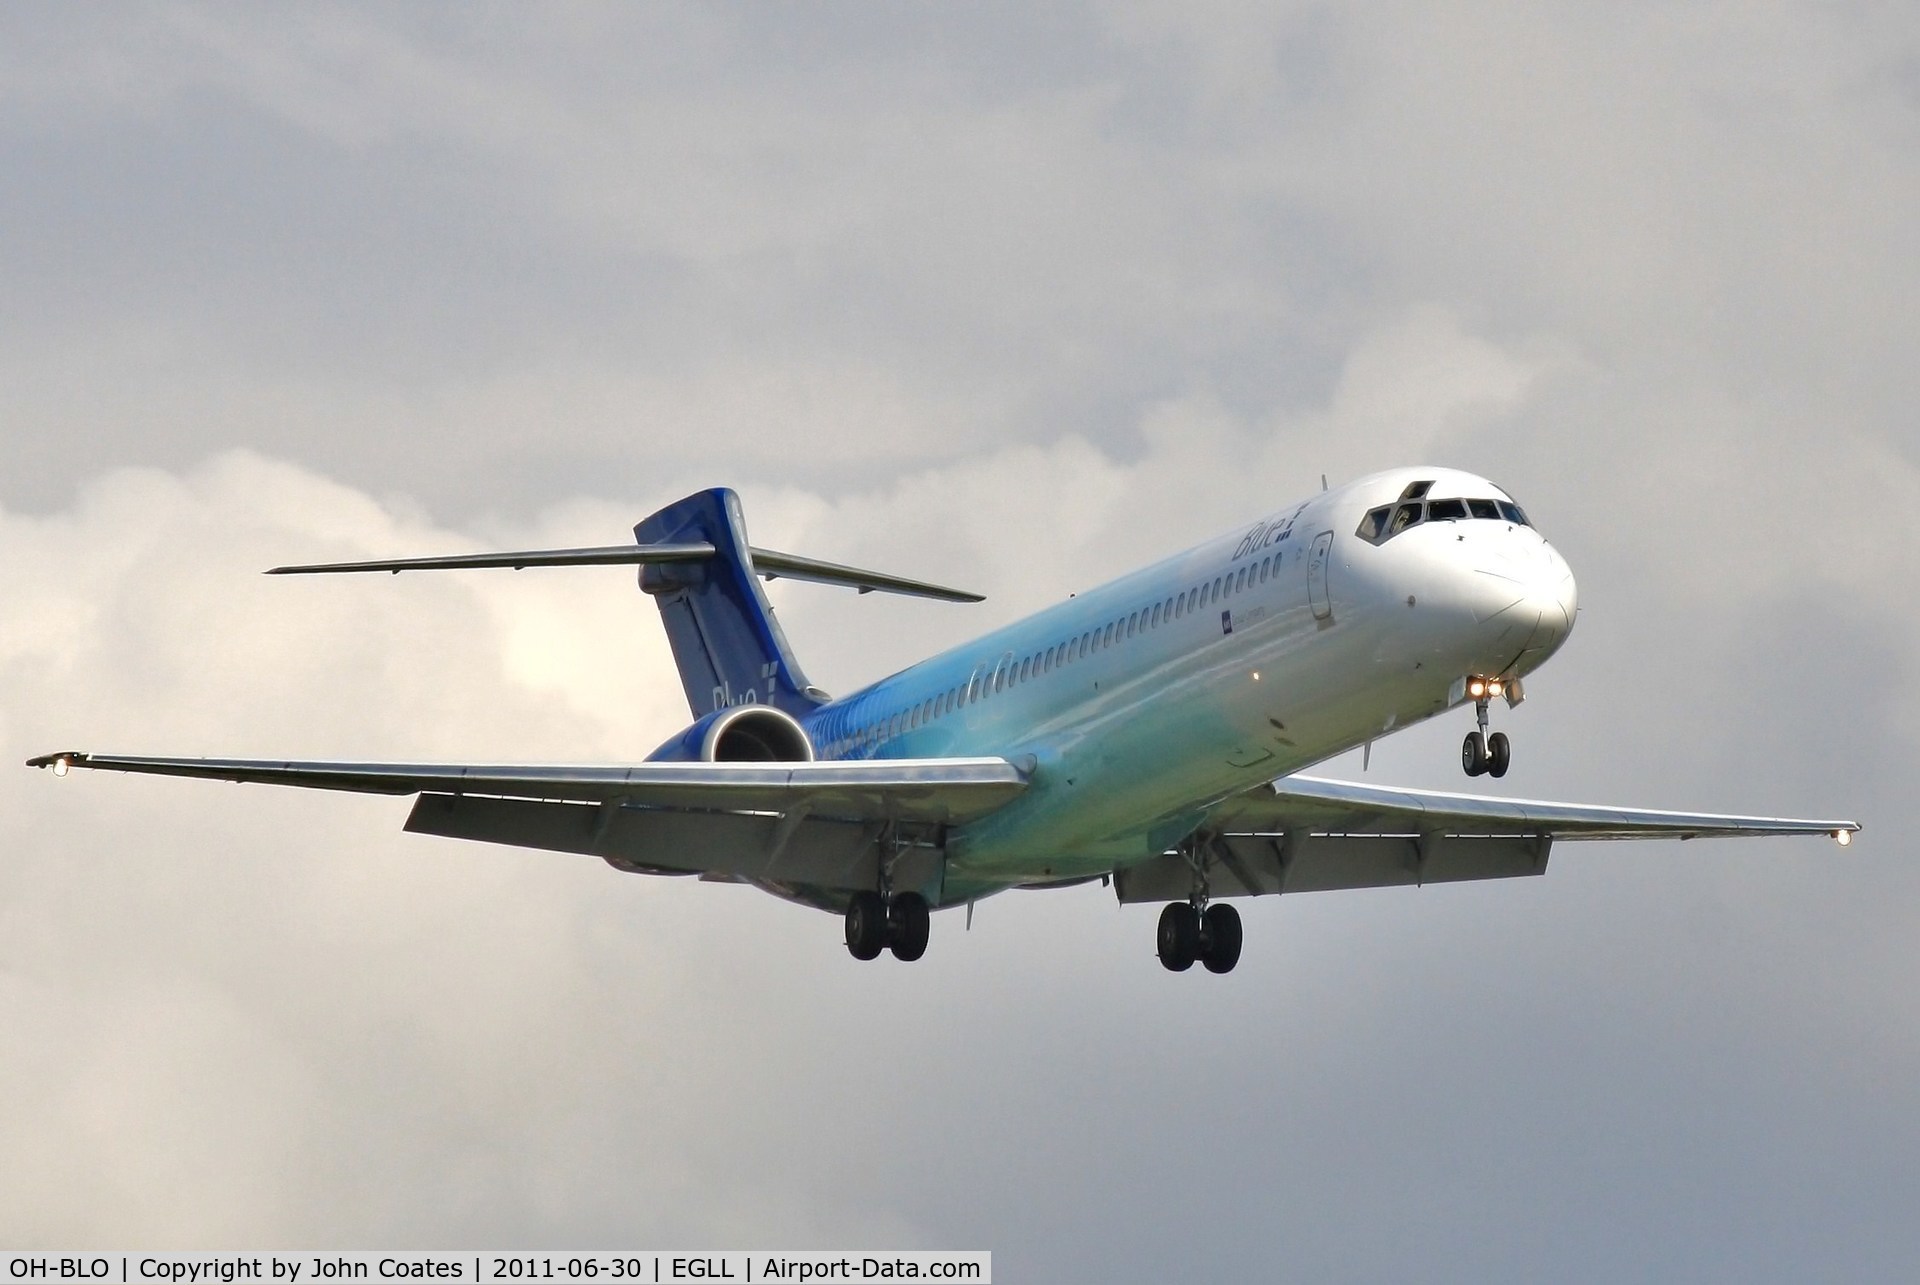 OH-BLO, 1999 Boeing 717-2K9 C/N 55056, On approach to 27R